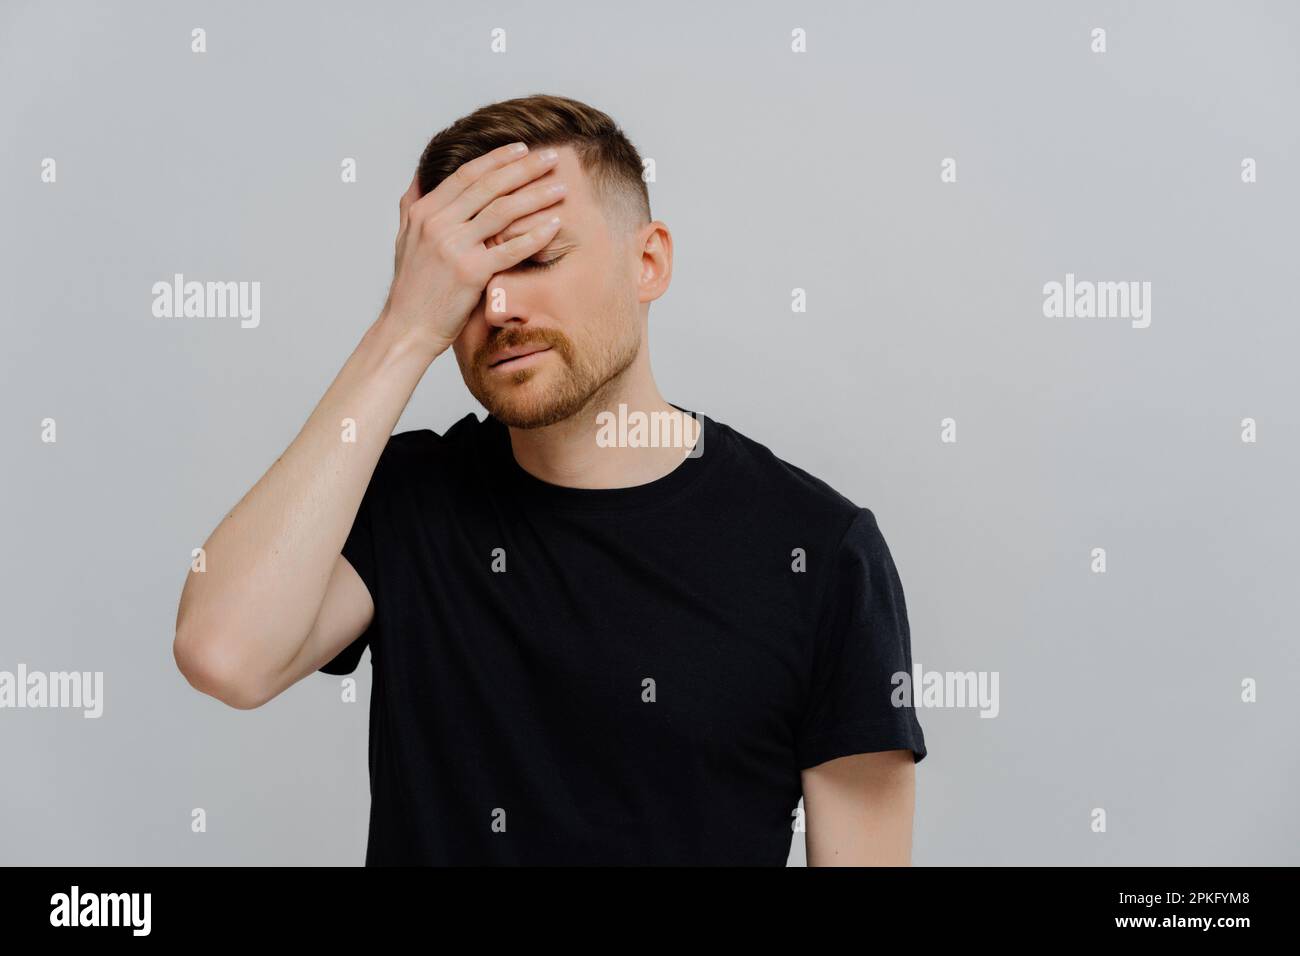 Young tired bearded man in black tshirt with closed eyes feeling sleepy, doing facepalm gesture while posing on pastel rose background, putting hand o Stock Photo